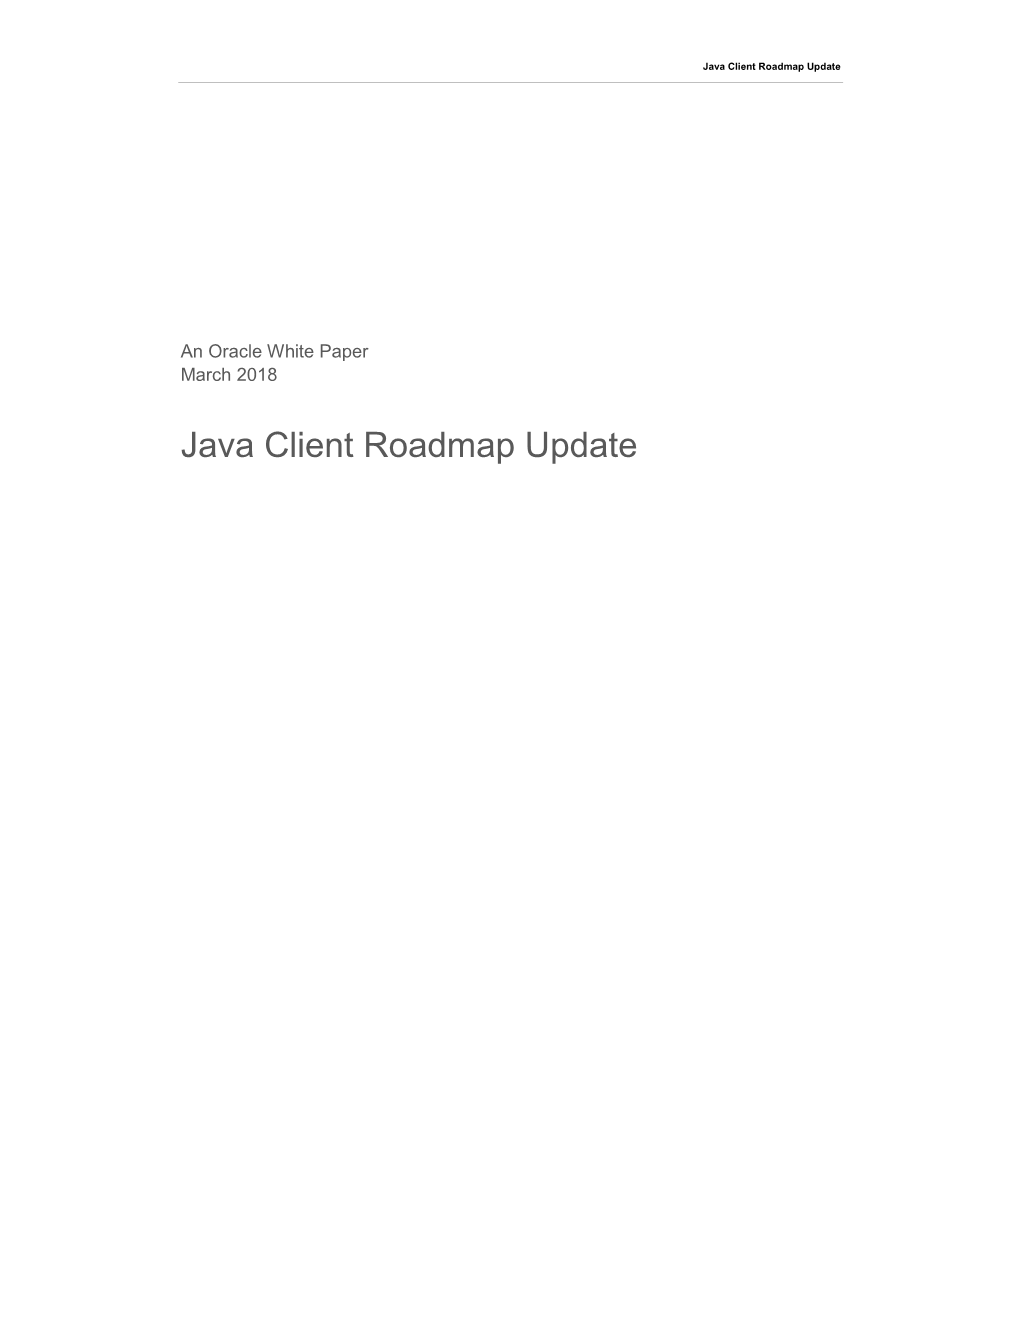 Java Client Road Map Update 2018-03-05